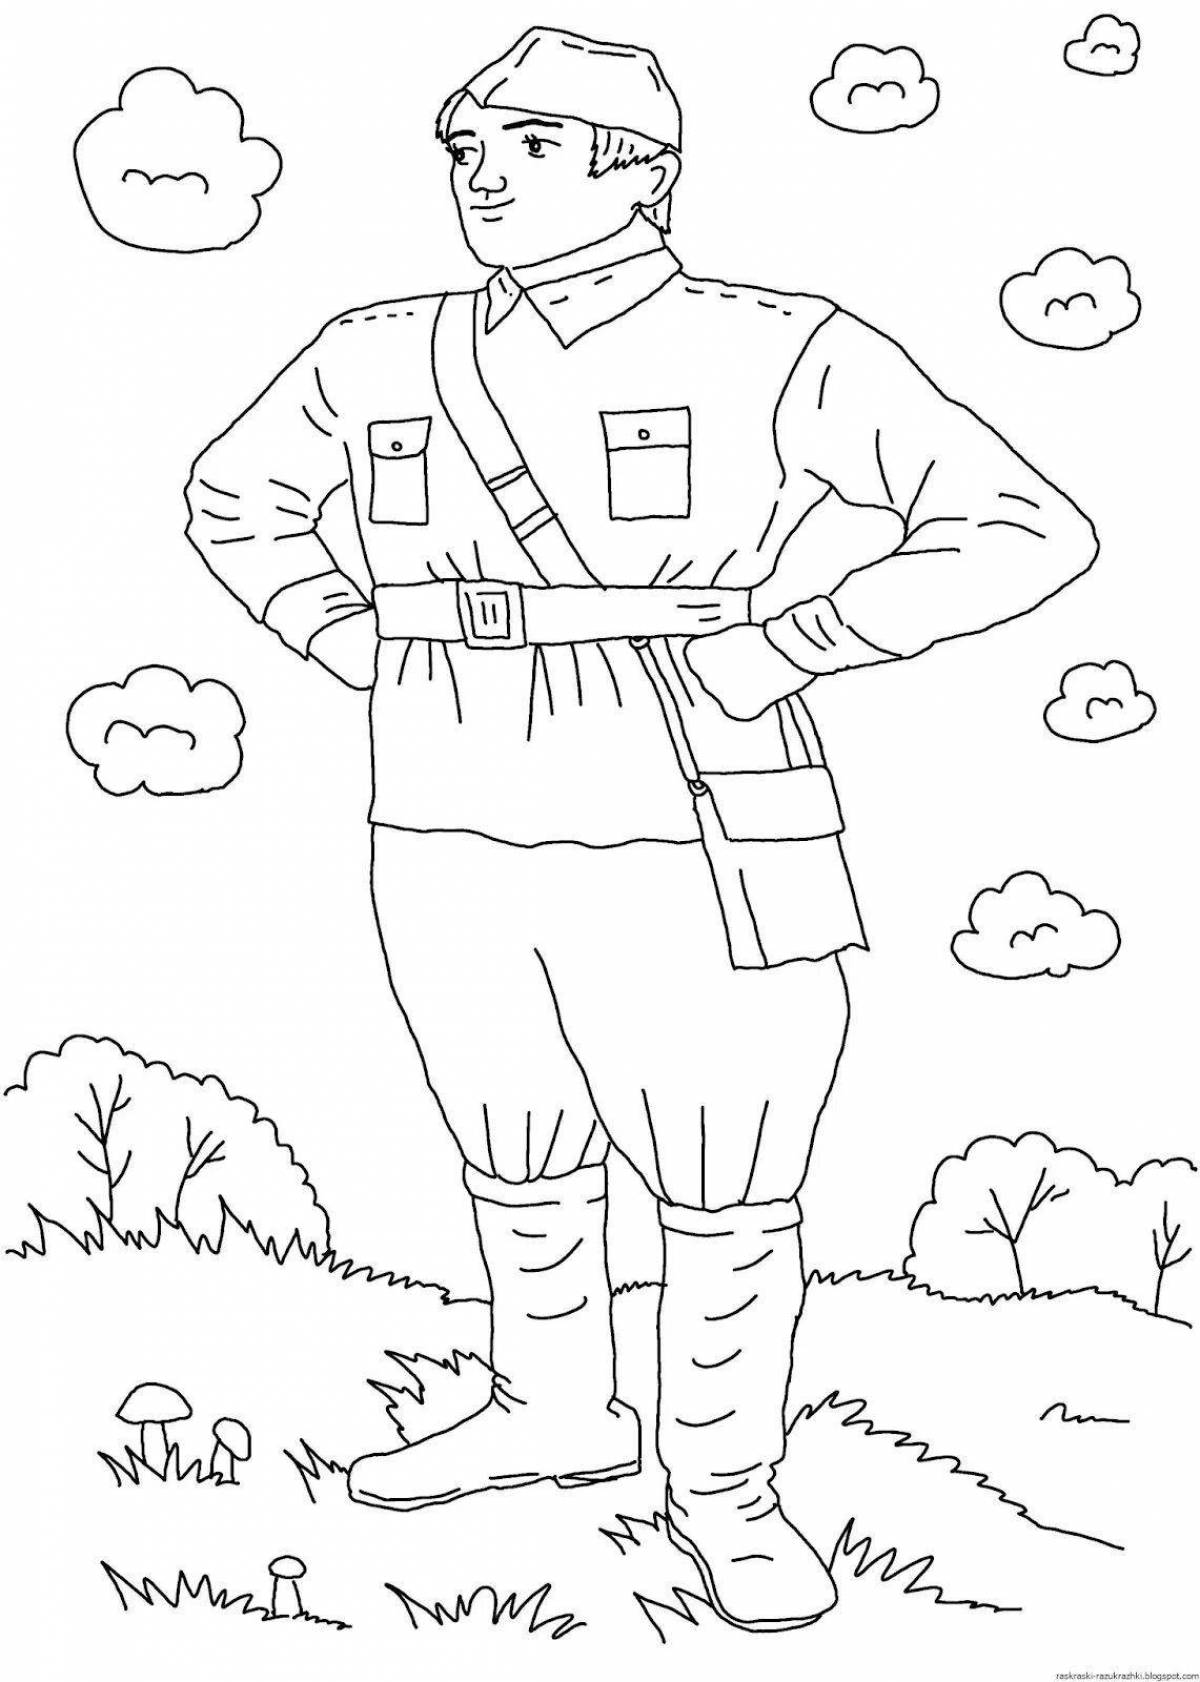 Coloring pages for brave soldiers